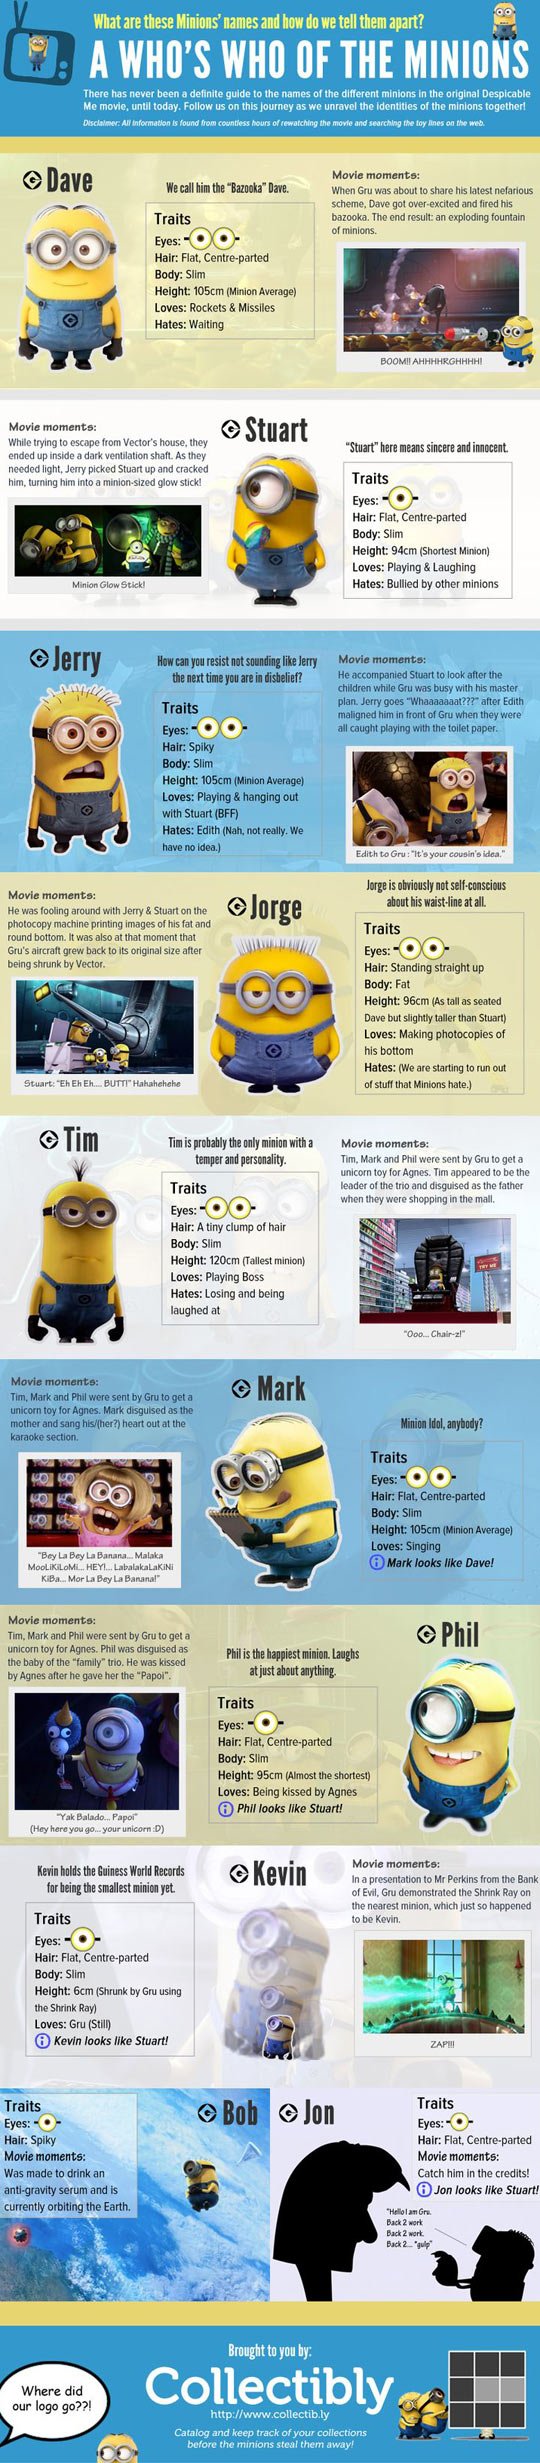 Who's who of the Minions.